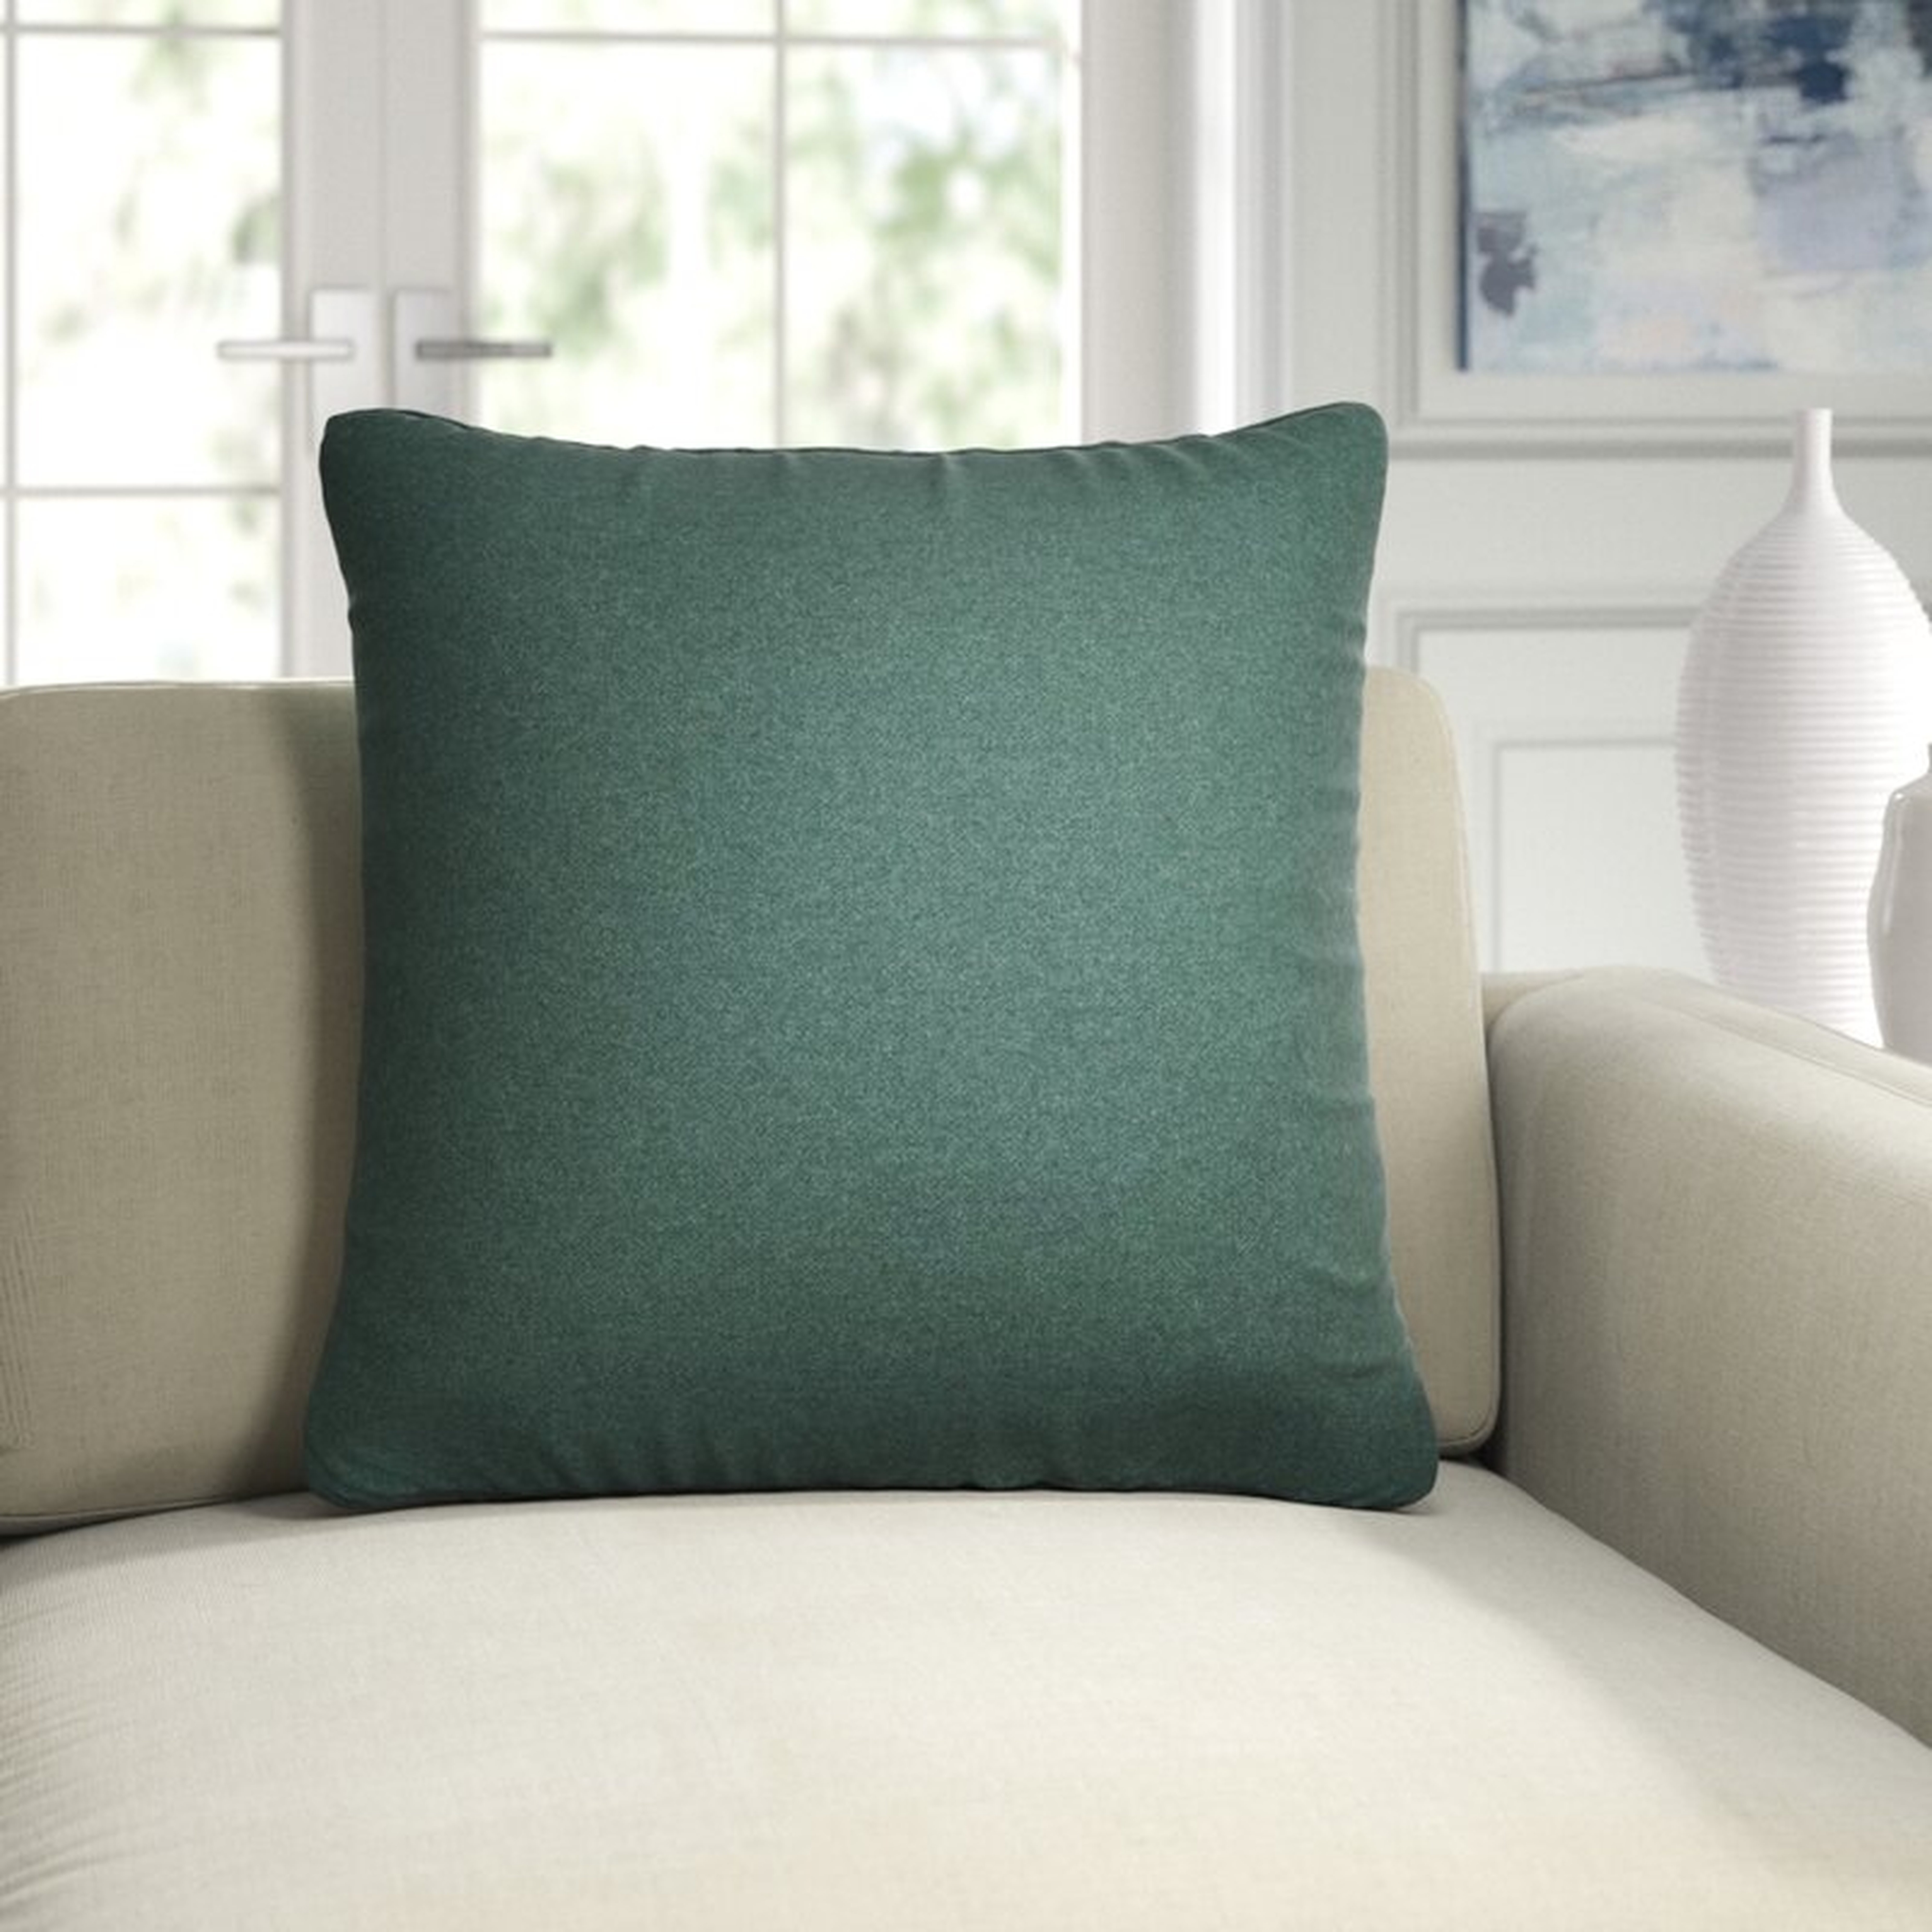 Eastern Accents Heathered Wool Vincent Textured Square Pillow Cover & Insert - Perigold